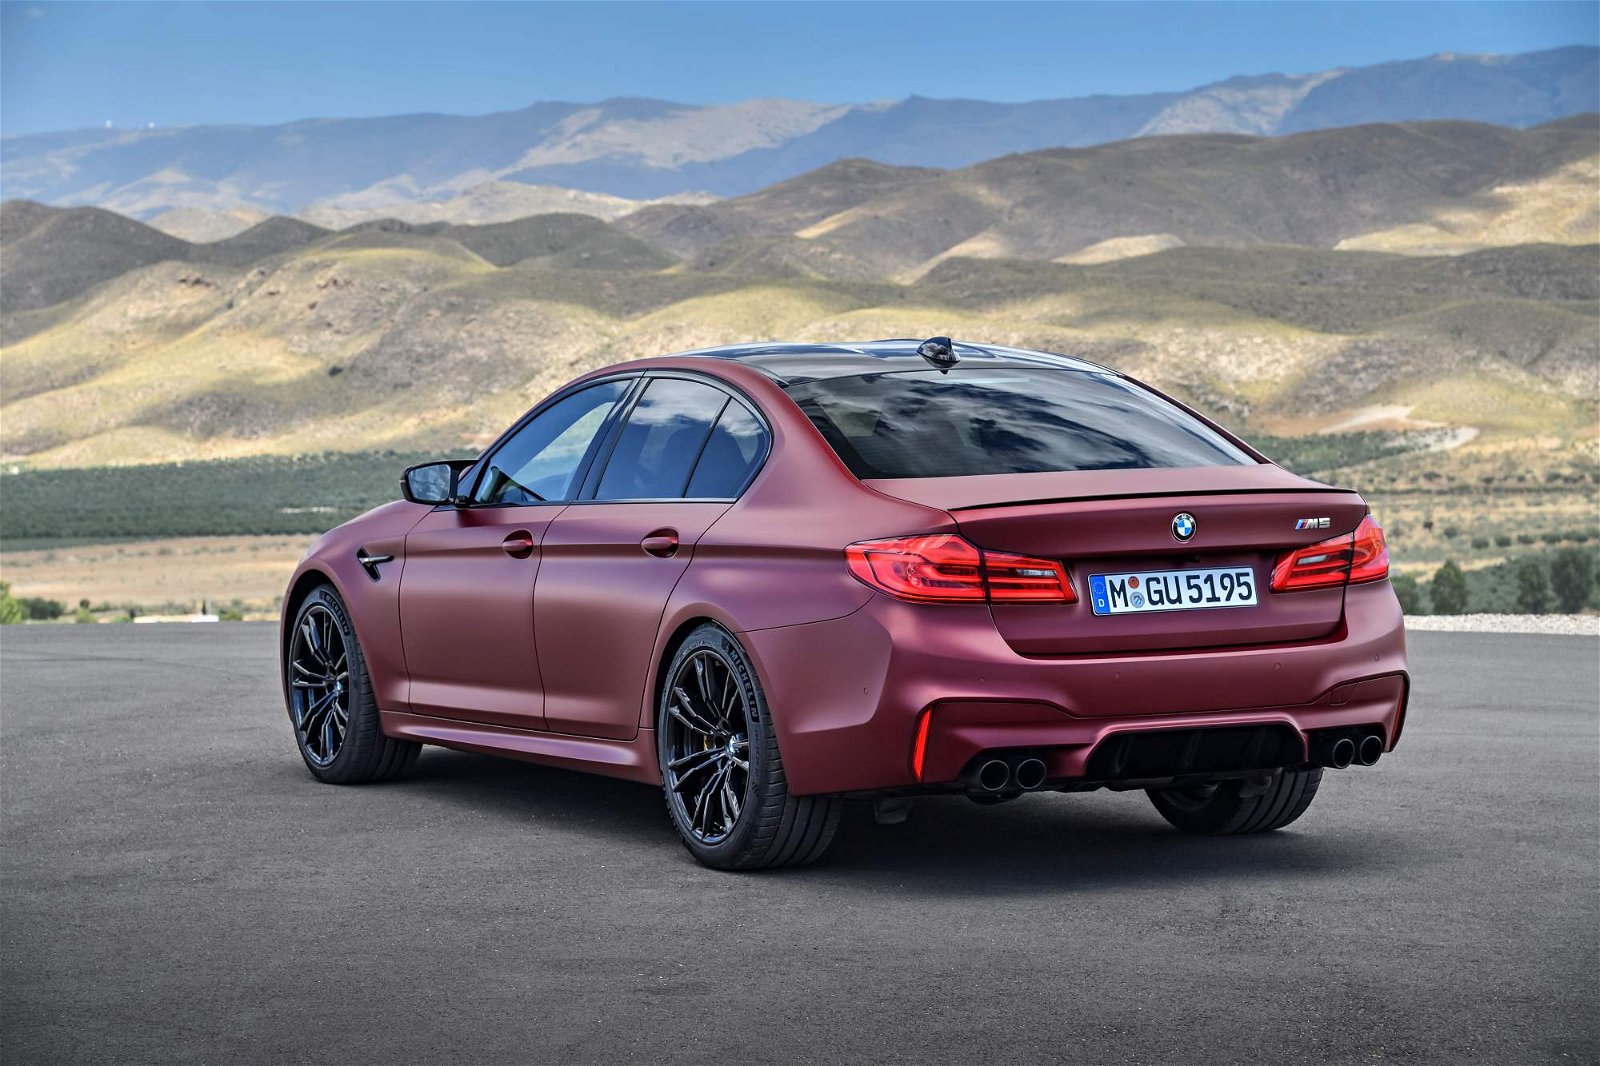 2018 BMW M5 First Edition rear side view